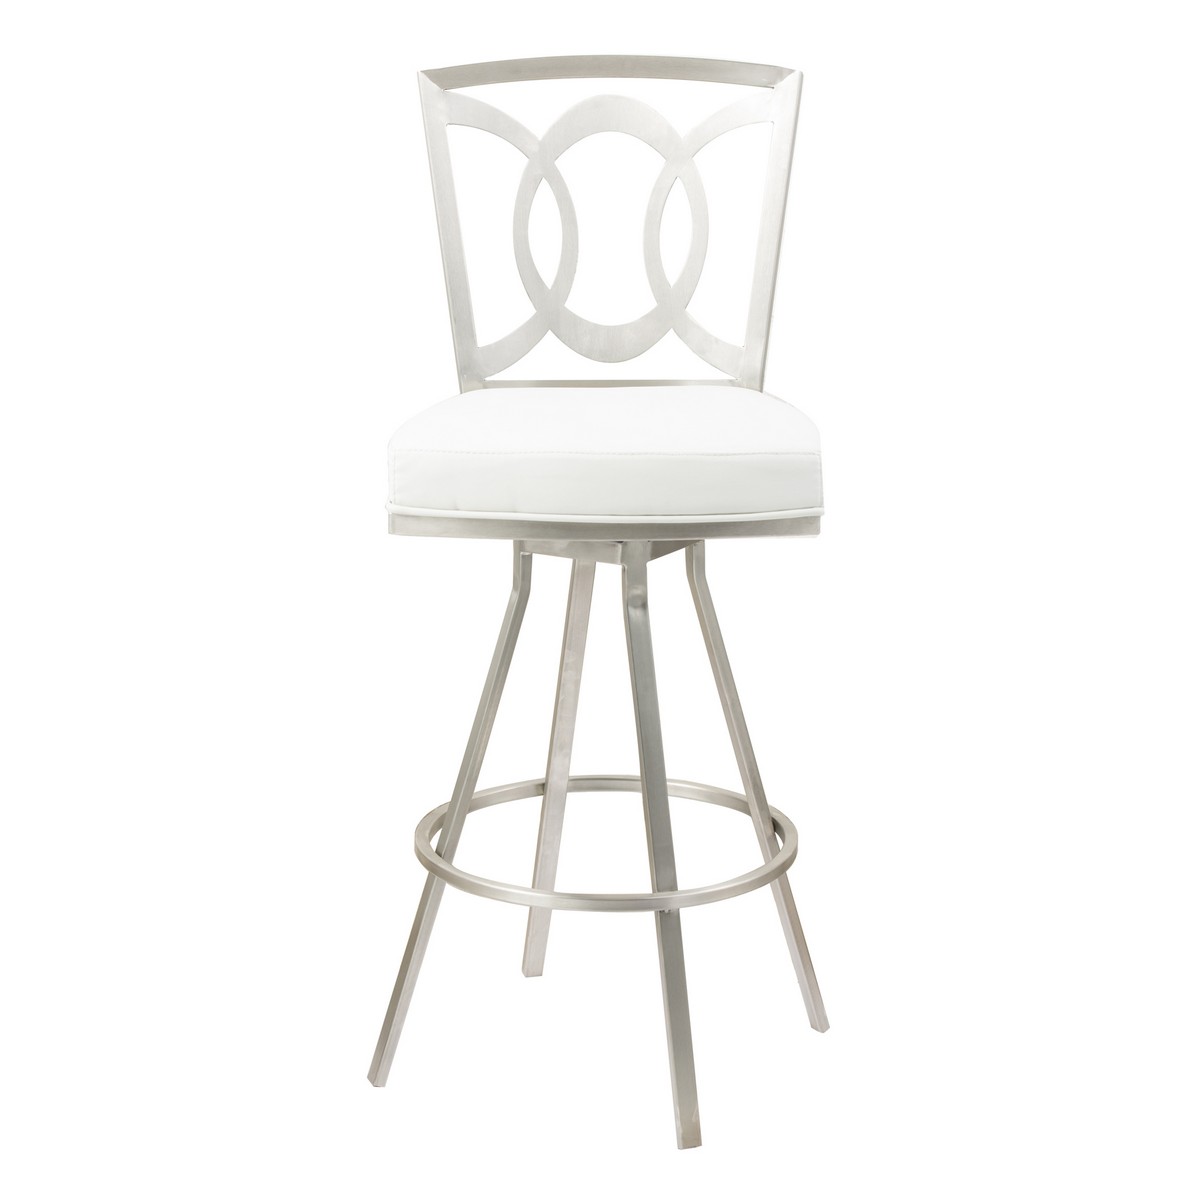 Armen Living Drake 26-inch Contemporary Swivel Barstool In White and Stainless Steel